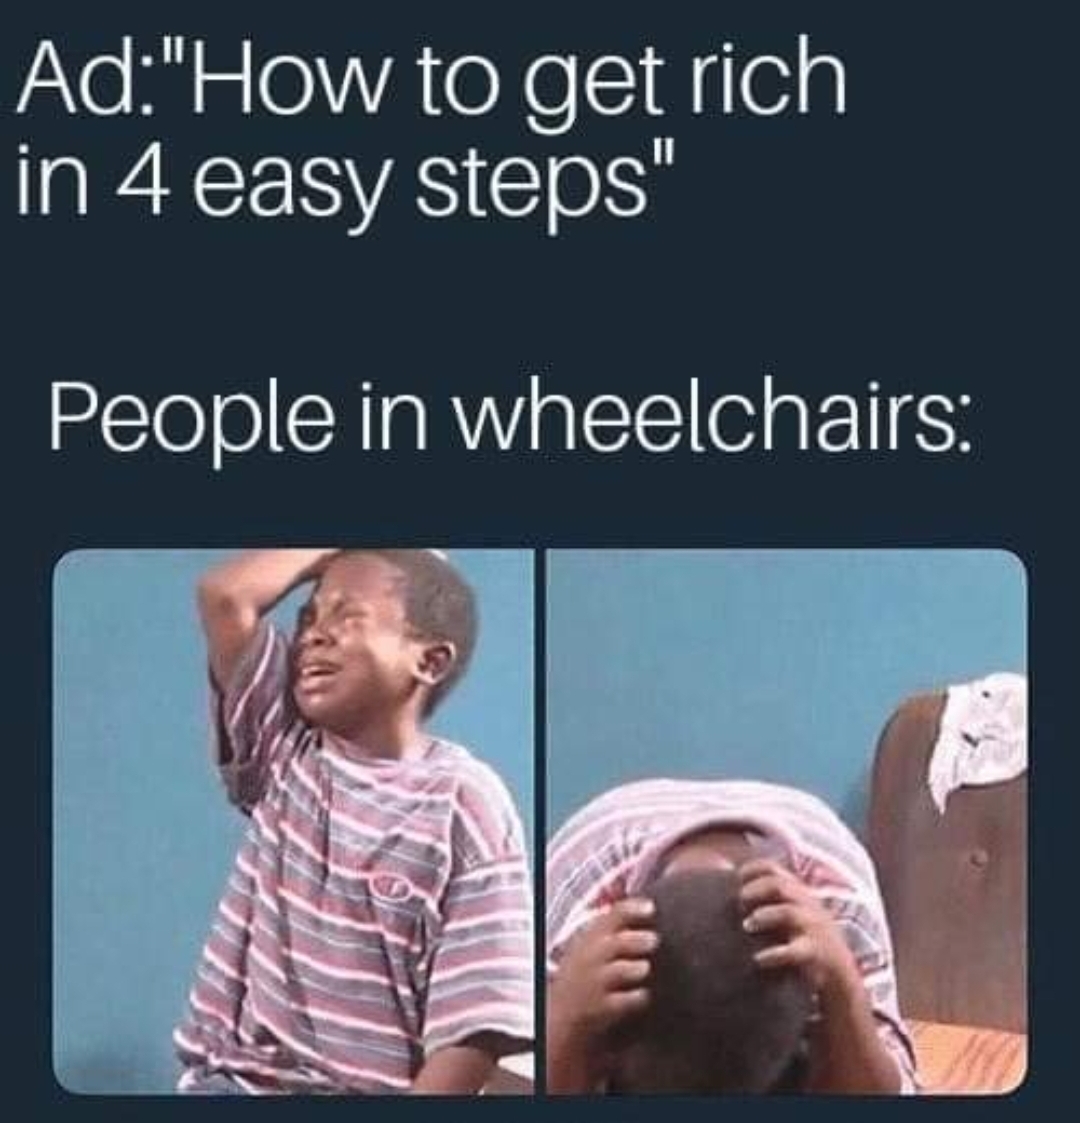 destroyed in seconds meme - Ad"How to get rich in 4 easy steps" People in wheelchairs